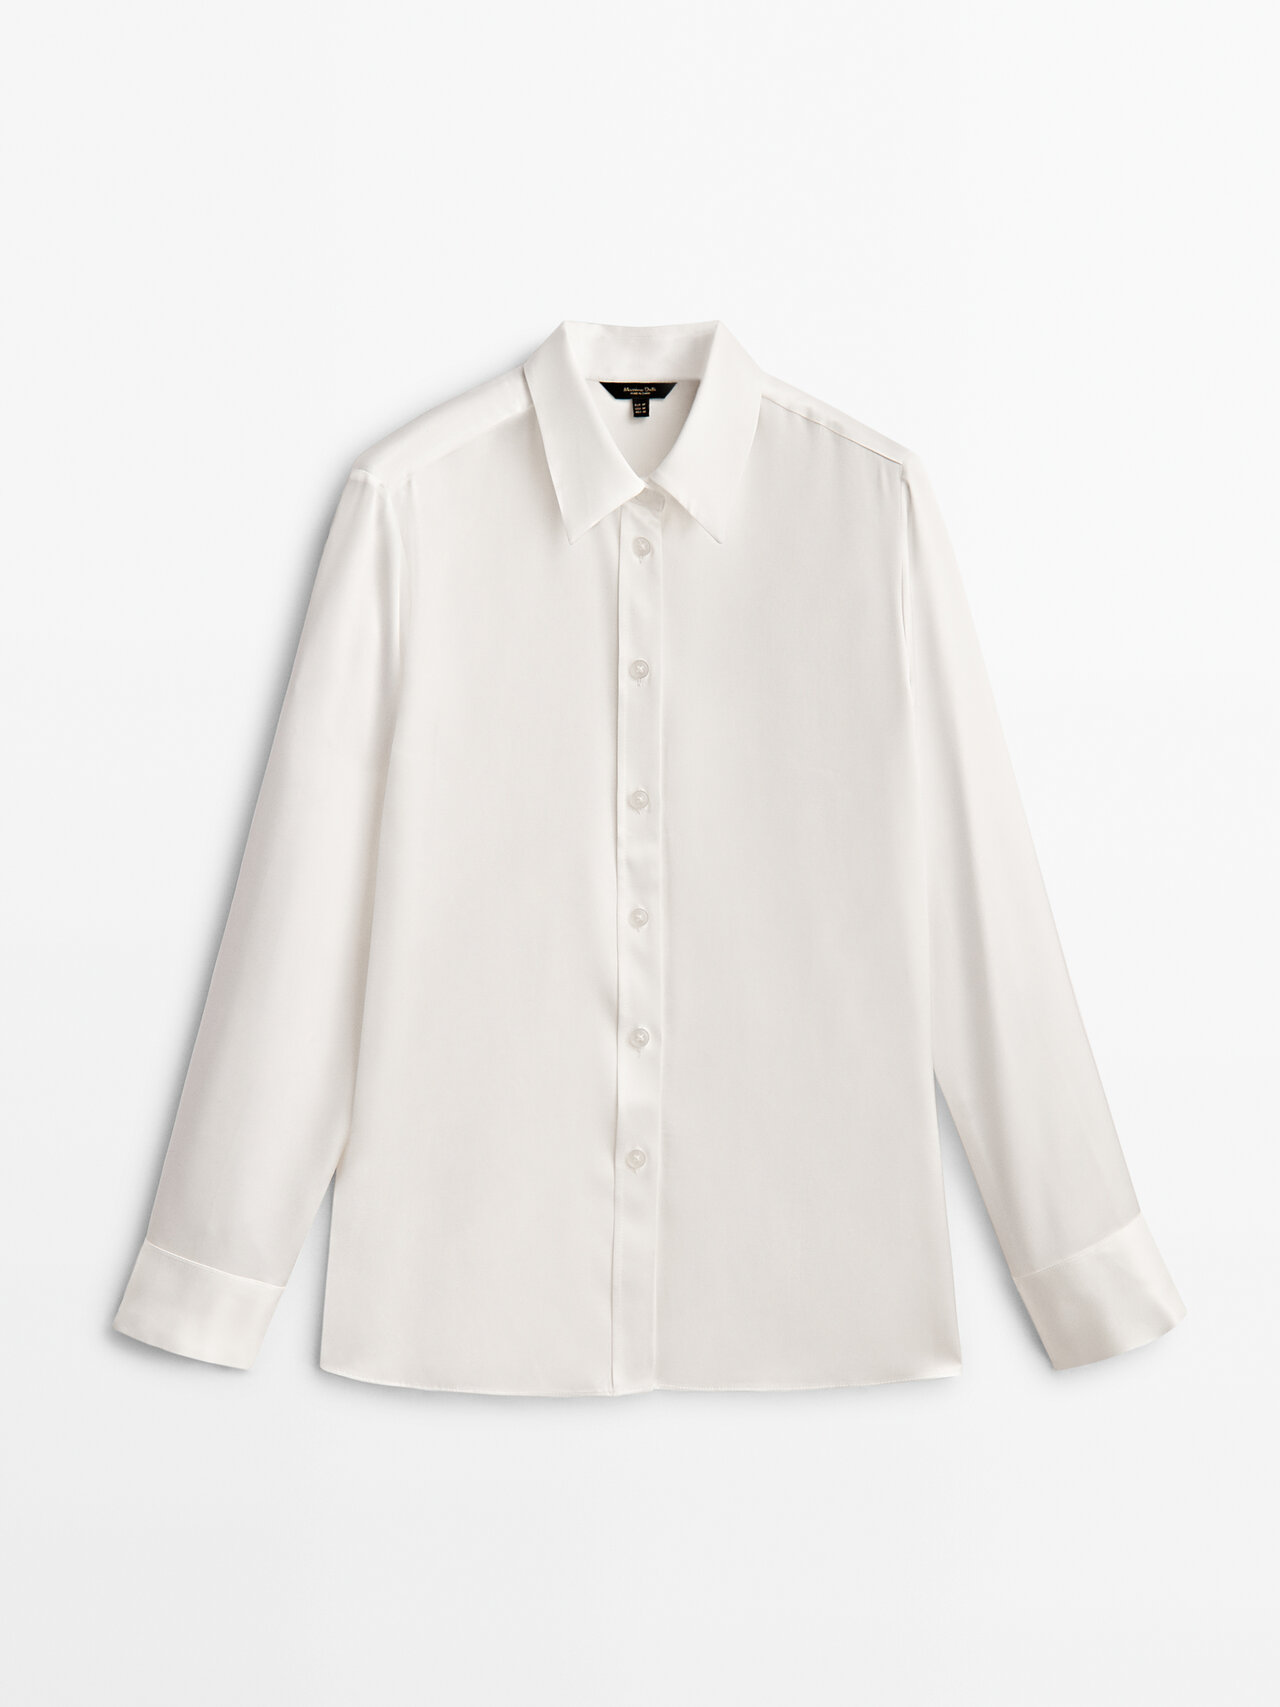 Massimo Dutti Satin Shirt With Cut-out Details In Cream